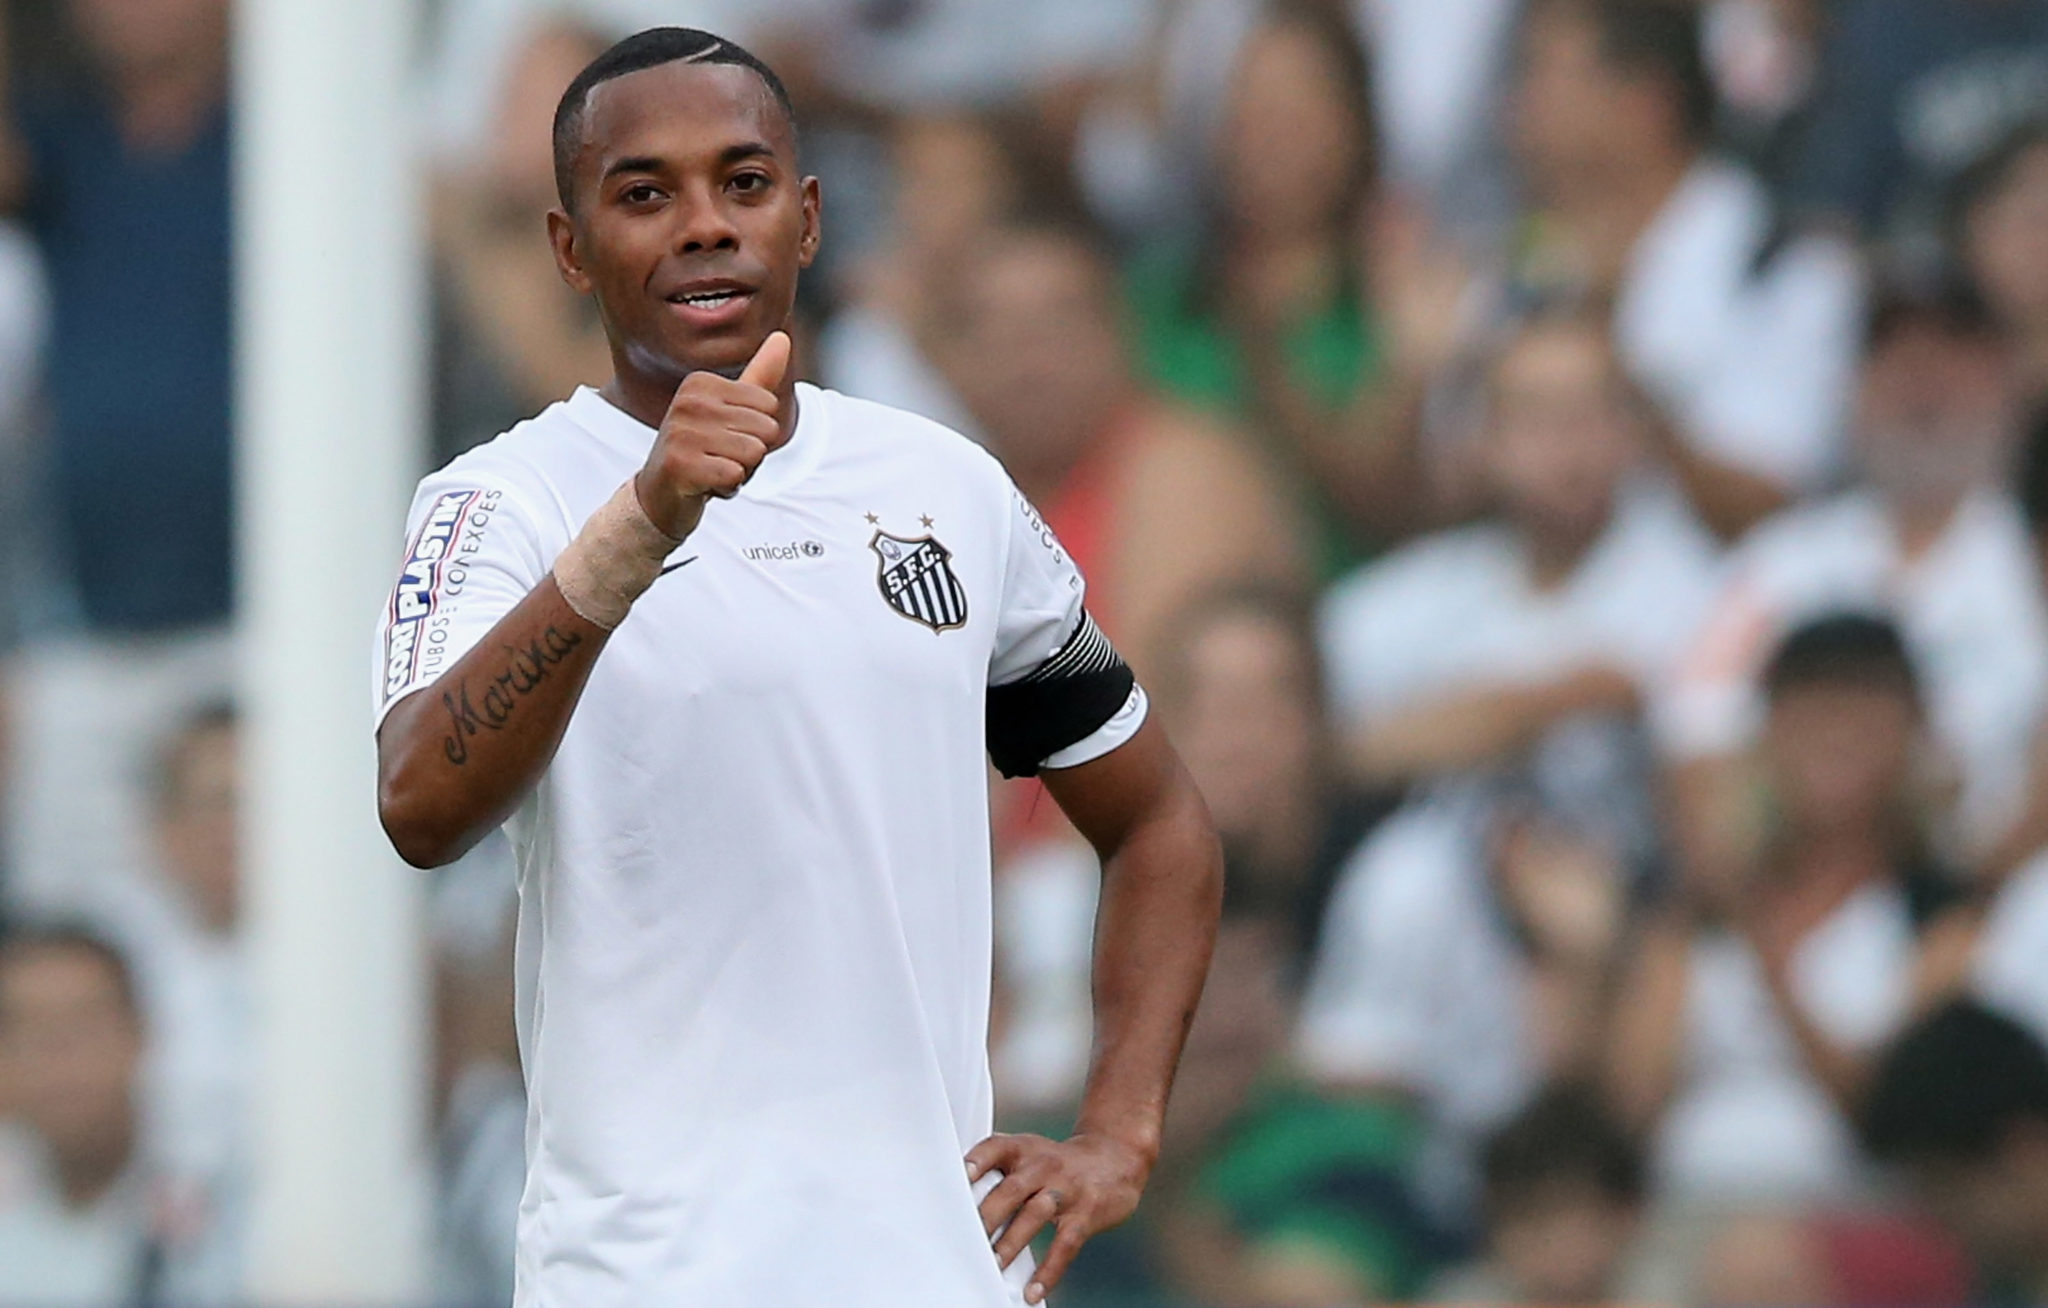 SANTOS, BRAZIL - MAY 17: Robinho of Santos reacts during the match between Santos and Cruzeiro for the Brazilian Series A 2015 at Vila Belmiro Stadium on May 17, 2015 in Santos, Brazil. (Photo by Friedemann Vogel/Getty Images)